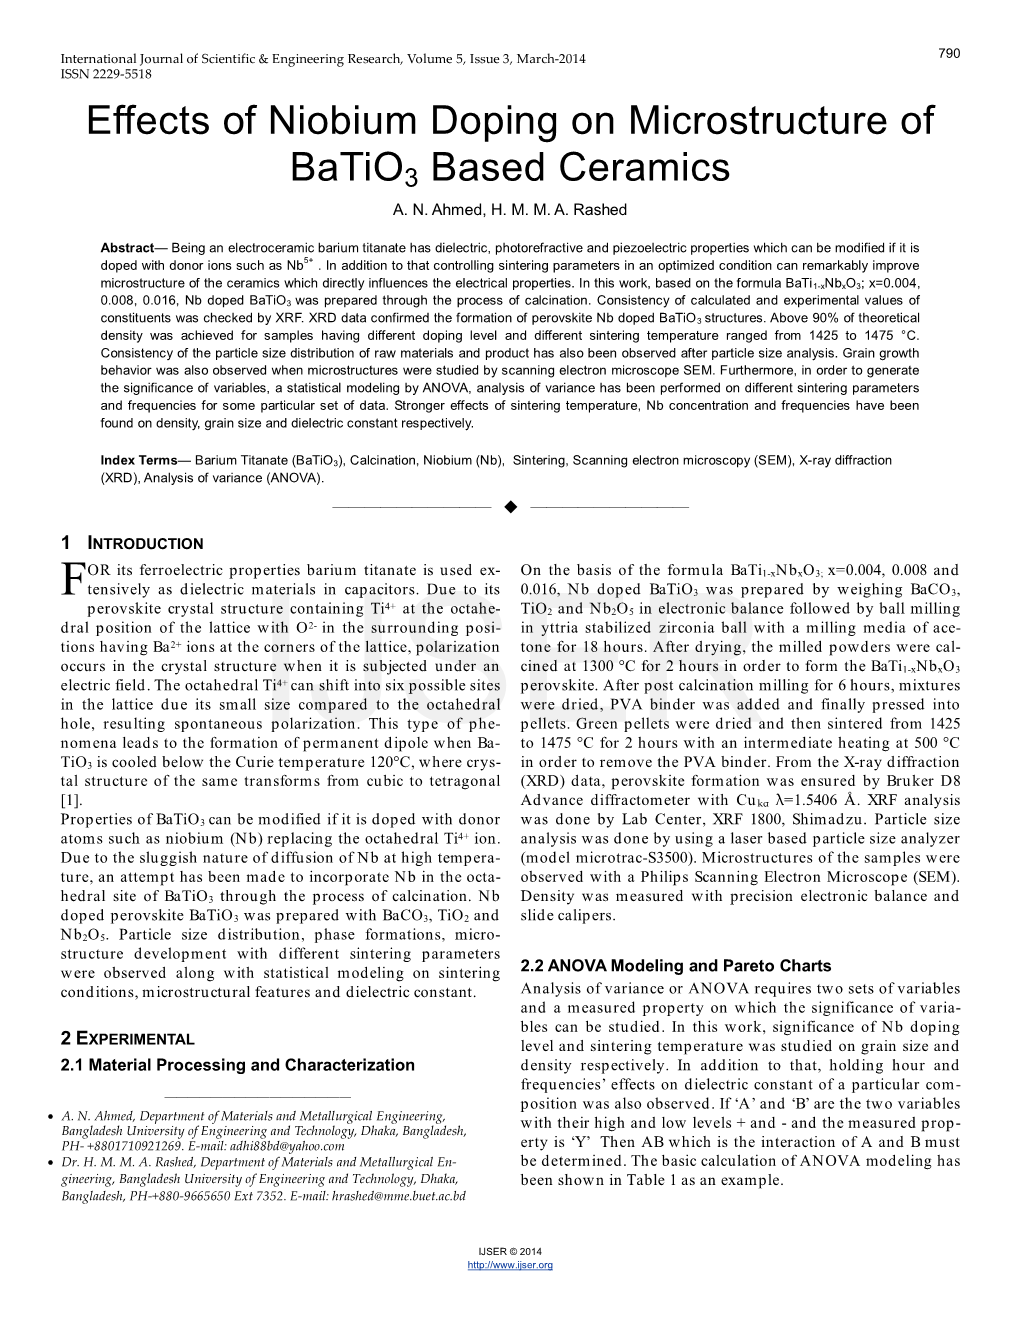 Effects of Niobium Doping on Microstructure of Batio3 Based Ceramics A